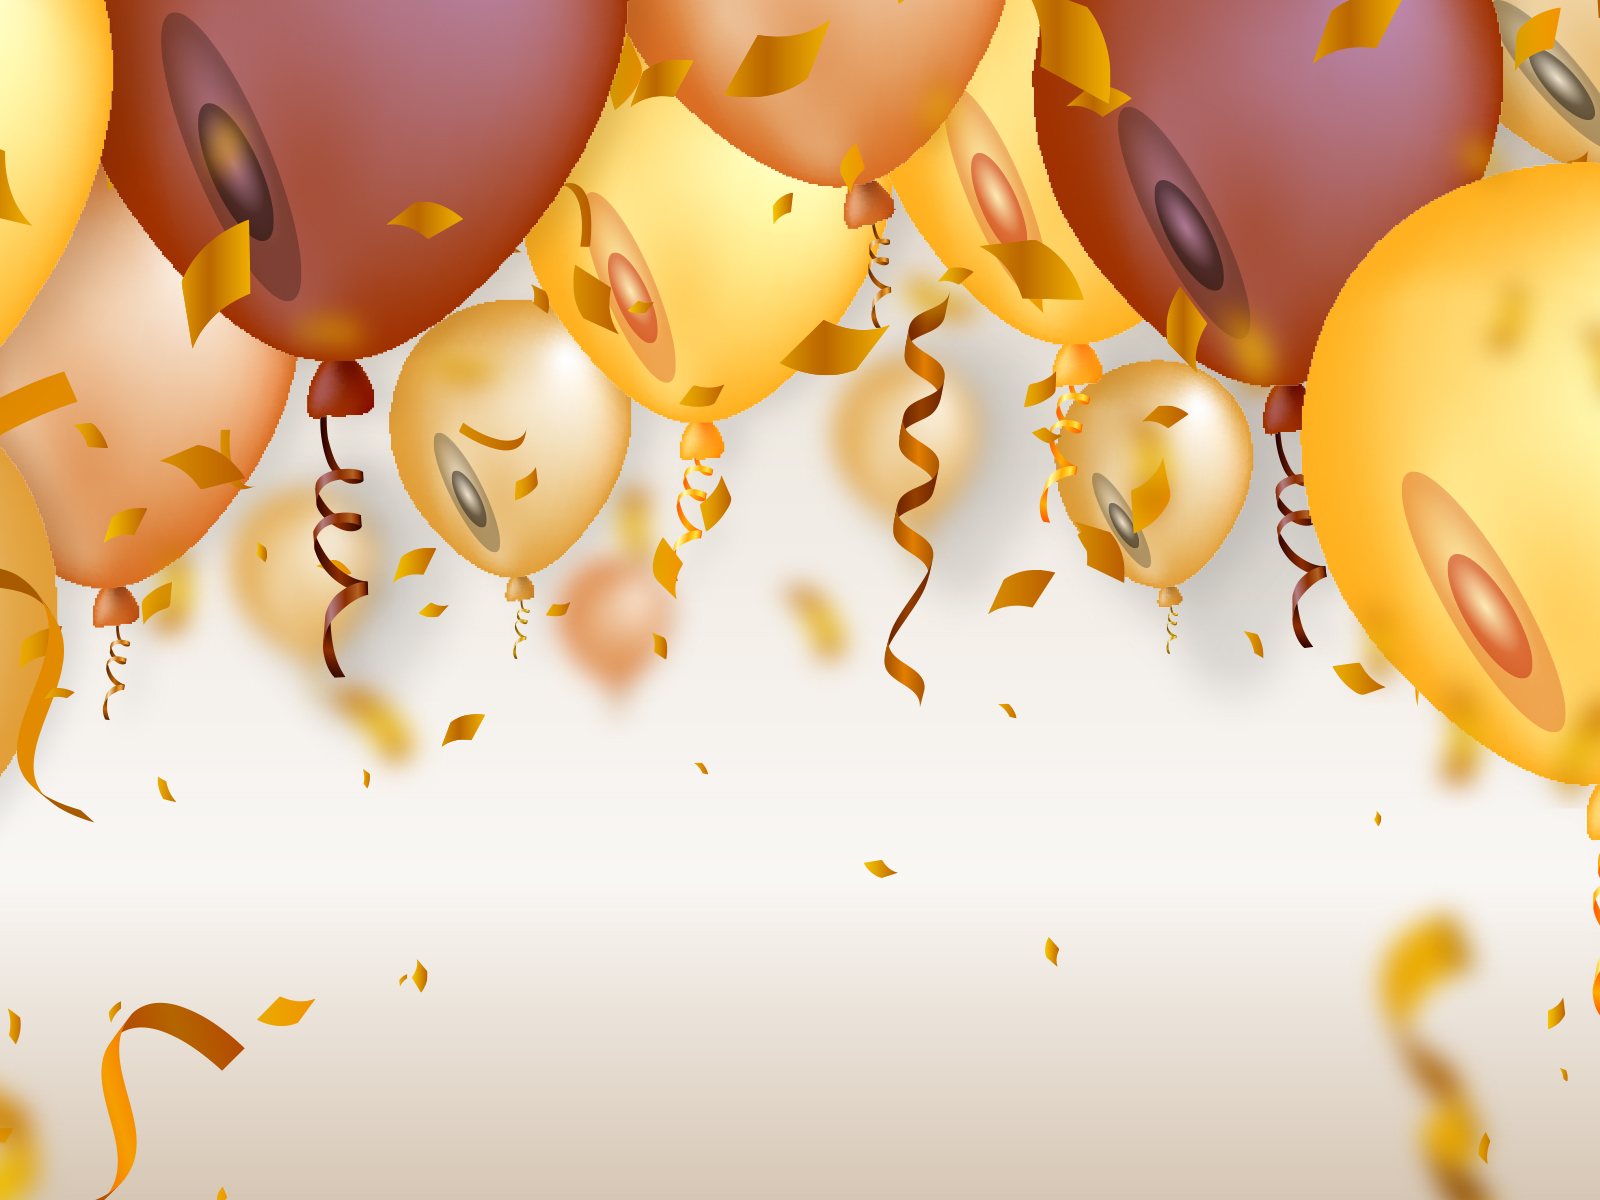 Suprise Balloons Backgrounds For Powerpoint Templates Ppt Backgrounds 8758